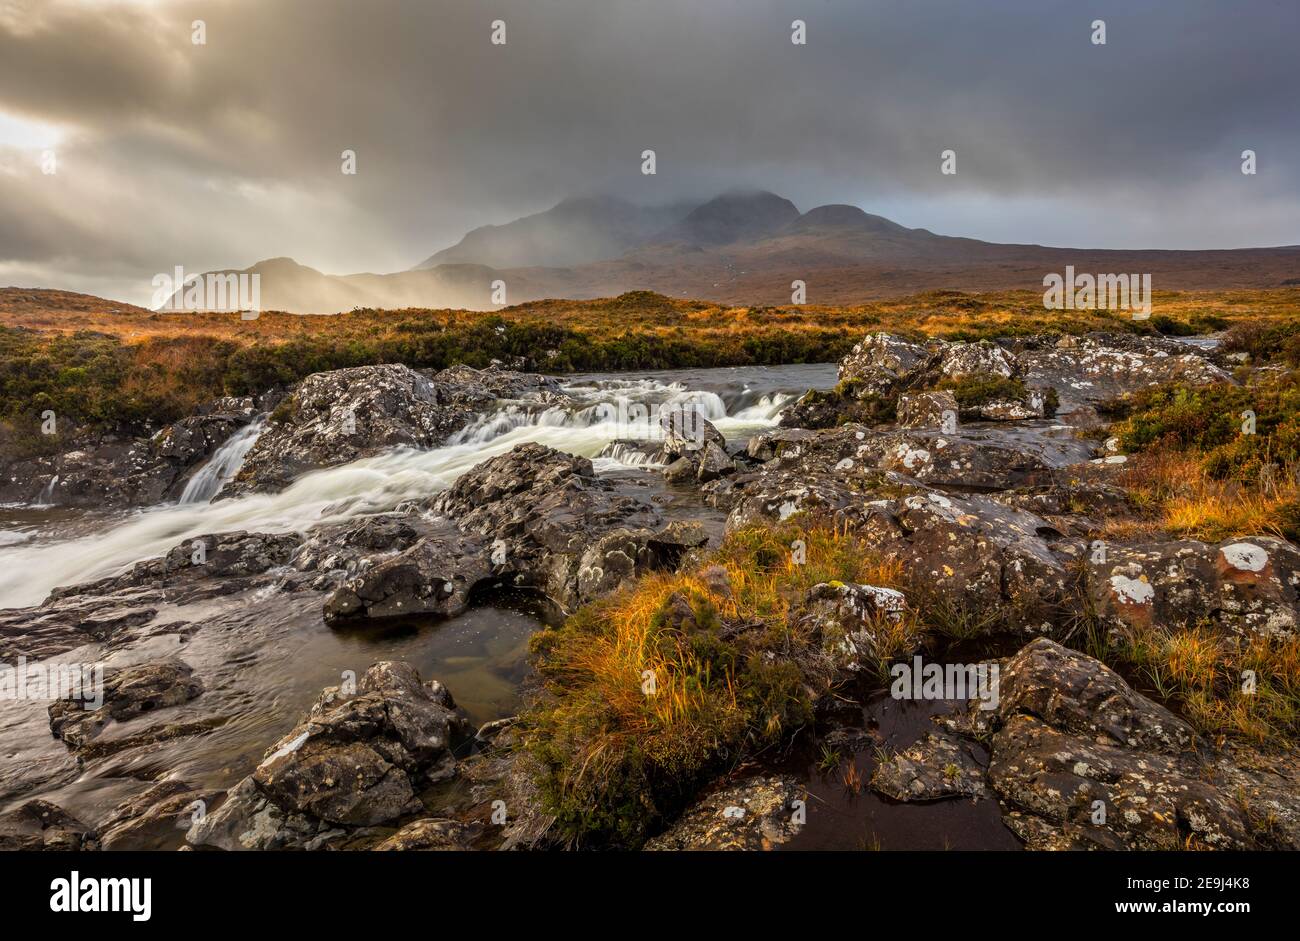 Isle of Skye, Scotland: Rushing waters of the River Sligachan and breaking light on the Black Cuillin Mountains in the distance. Stock Photo